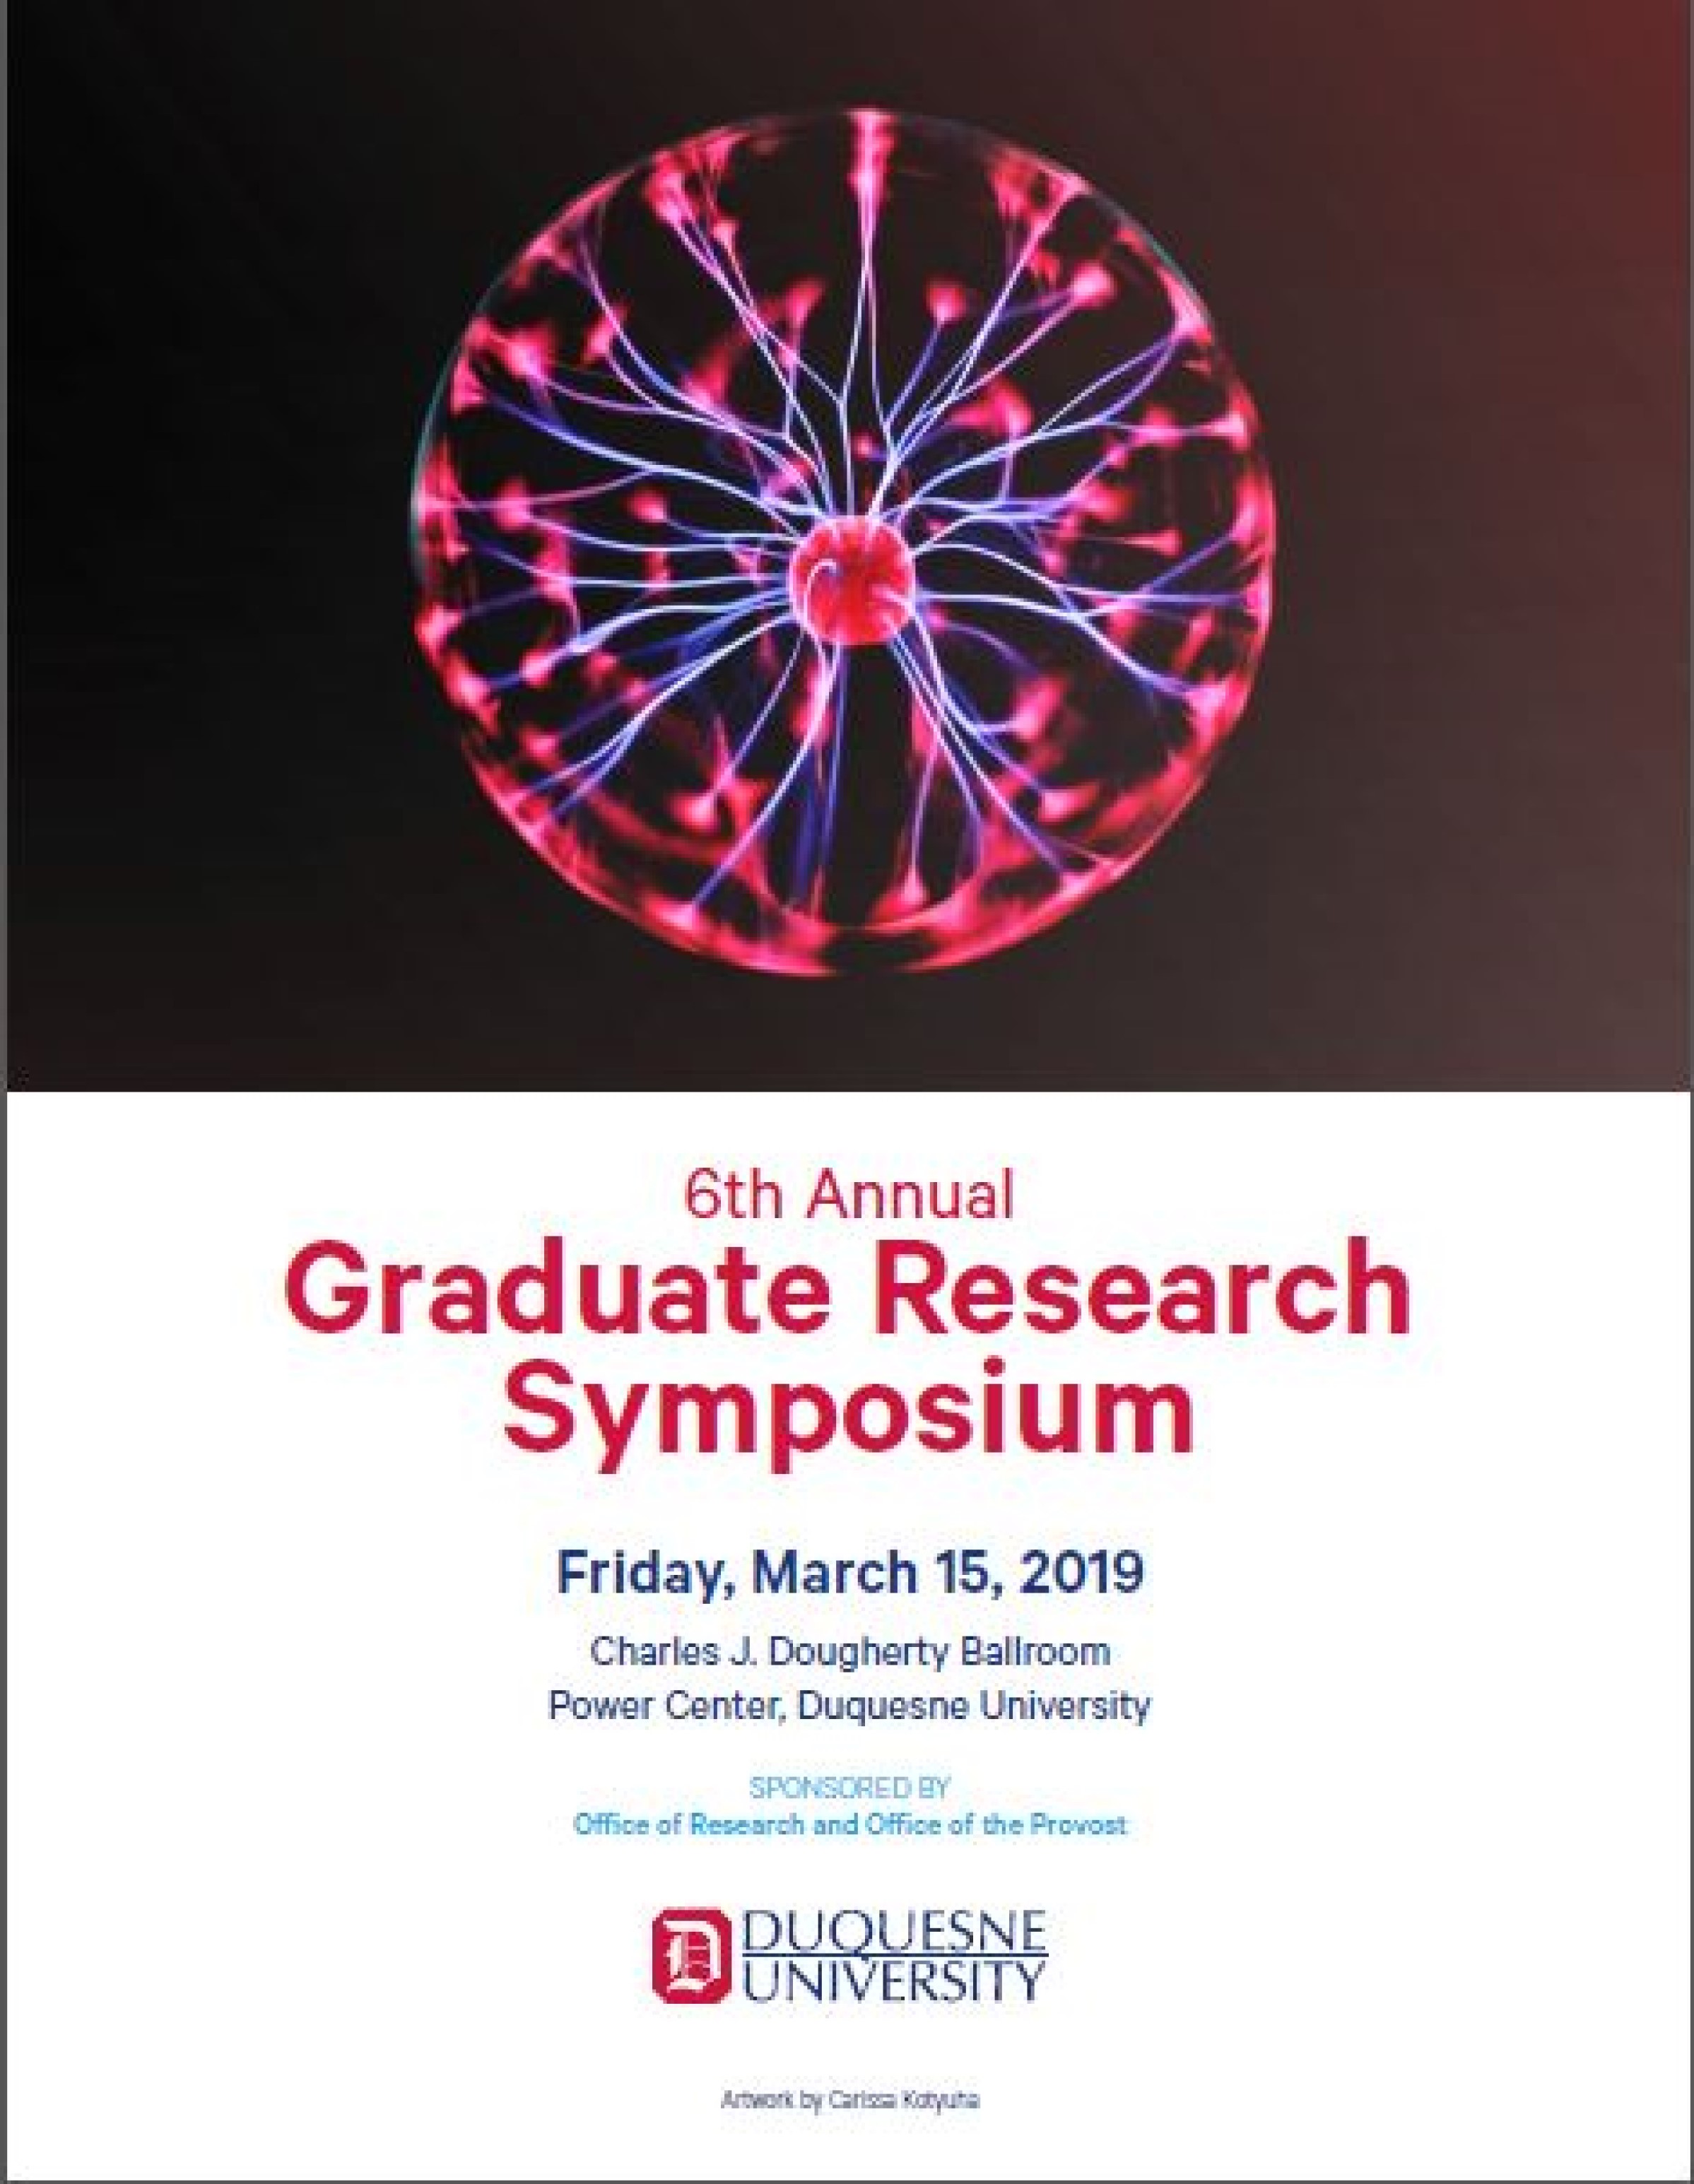 The 6th Annual Graduate Student Research Symposium